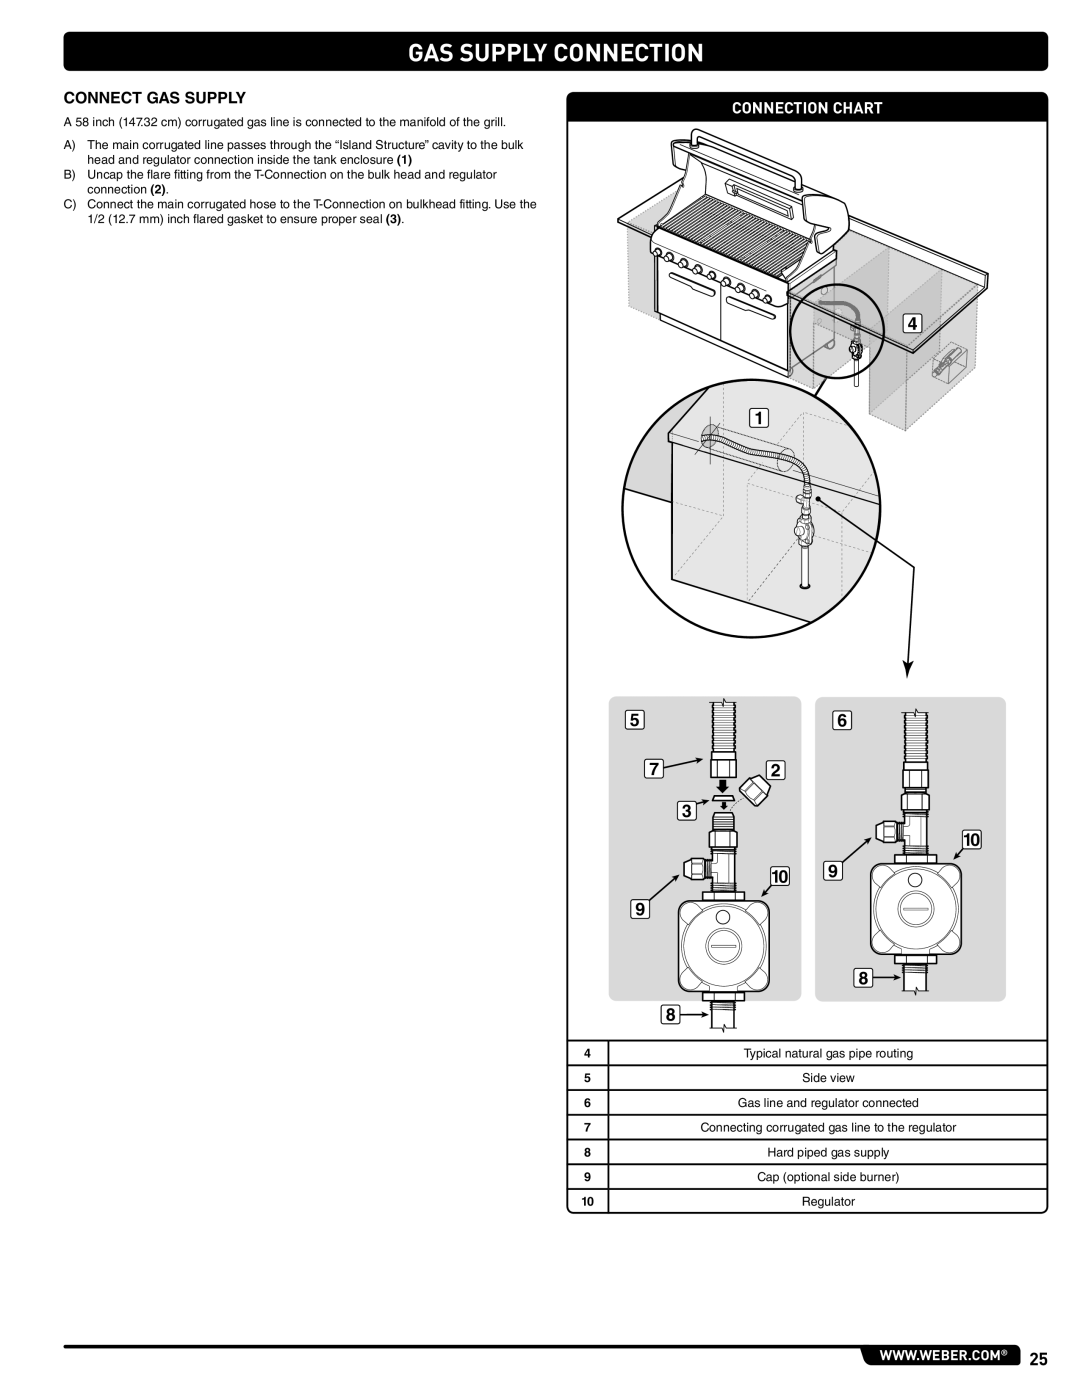 Weber 56576 Gas Supply Connection, Connection Chart, Side view, Gas line and regulator connected, Cap optional side burner 